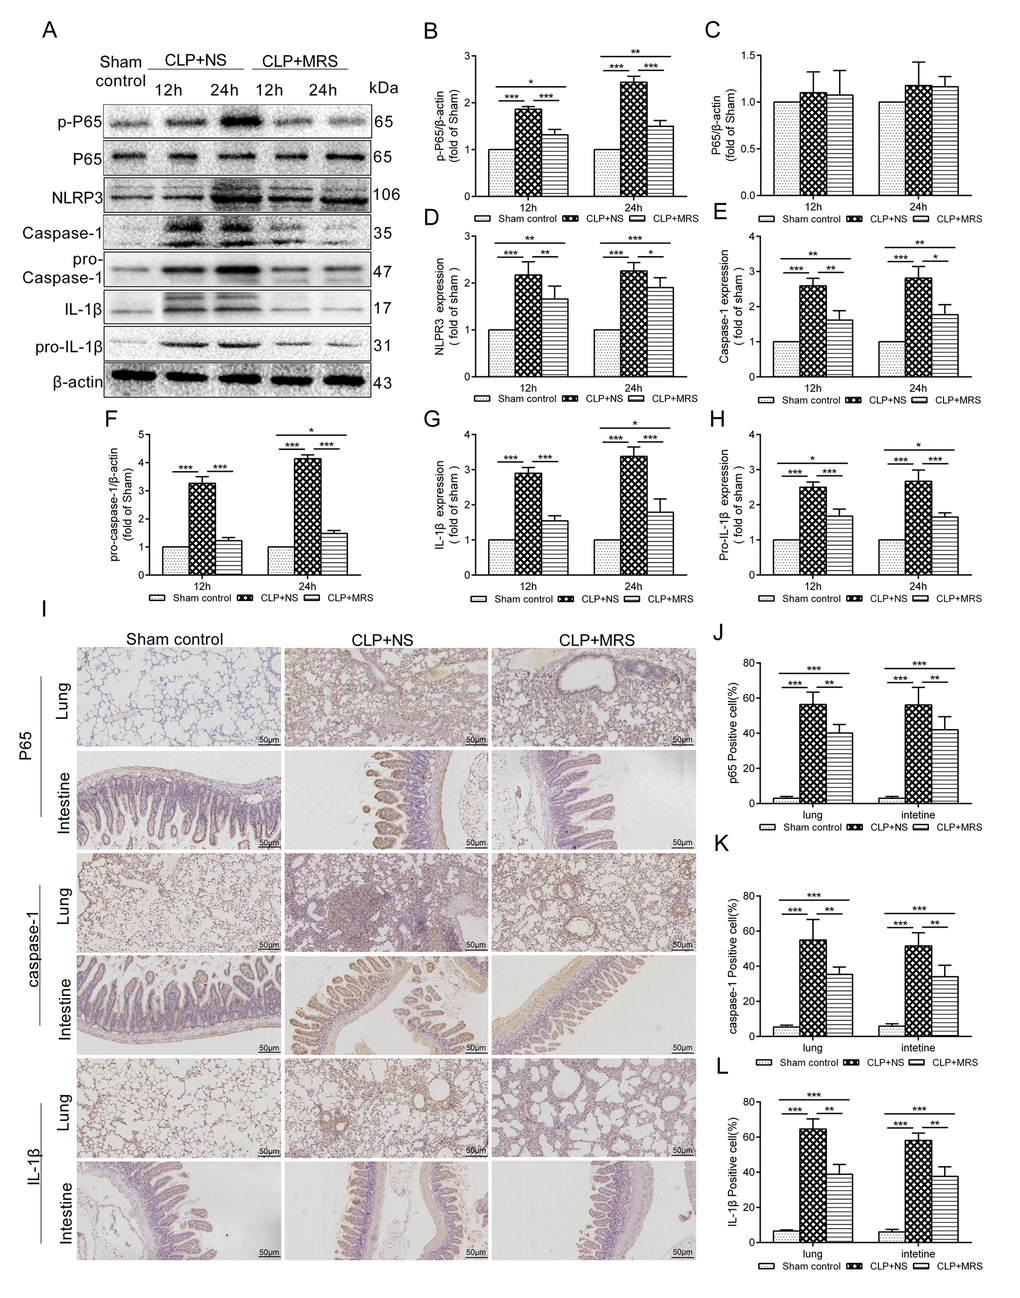 Methane-rich saline downregulated the NLRP3/Caspase-1/IL-18, IL-1β signaling pathway. The lung tissues were harvested 12 and 24 h after cecal ligation and puncture (CLP). (A) Representative immunoblots of p-p65, p65, pro-Caspase-1, pro-IL-1β and NLRP3/Caspase-1/ IL-1βfrom lung tissues 12 and 24h after MRS treatment. Relative densities of (B) p-P65. (C) P65. (D) NLRP3. (E) caspase-1. (F) pro-caspase-1. (G) IL-1β. (H) pro-IL-1β were calculated. (I) Representative immumohistochemical staining of P65, caspse-1 and IL-1β in the lung and intestine tissues. (J-L) The percentage of P65, caspse-1 and IL-1β positive cells were calculated. (Scale bars: 50μm. Data are shown as the mean ±SD. *P  **p ***P 